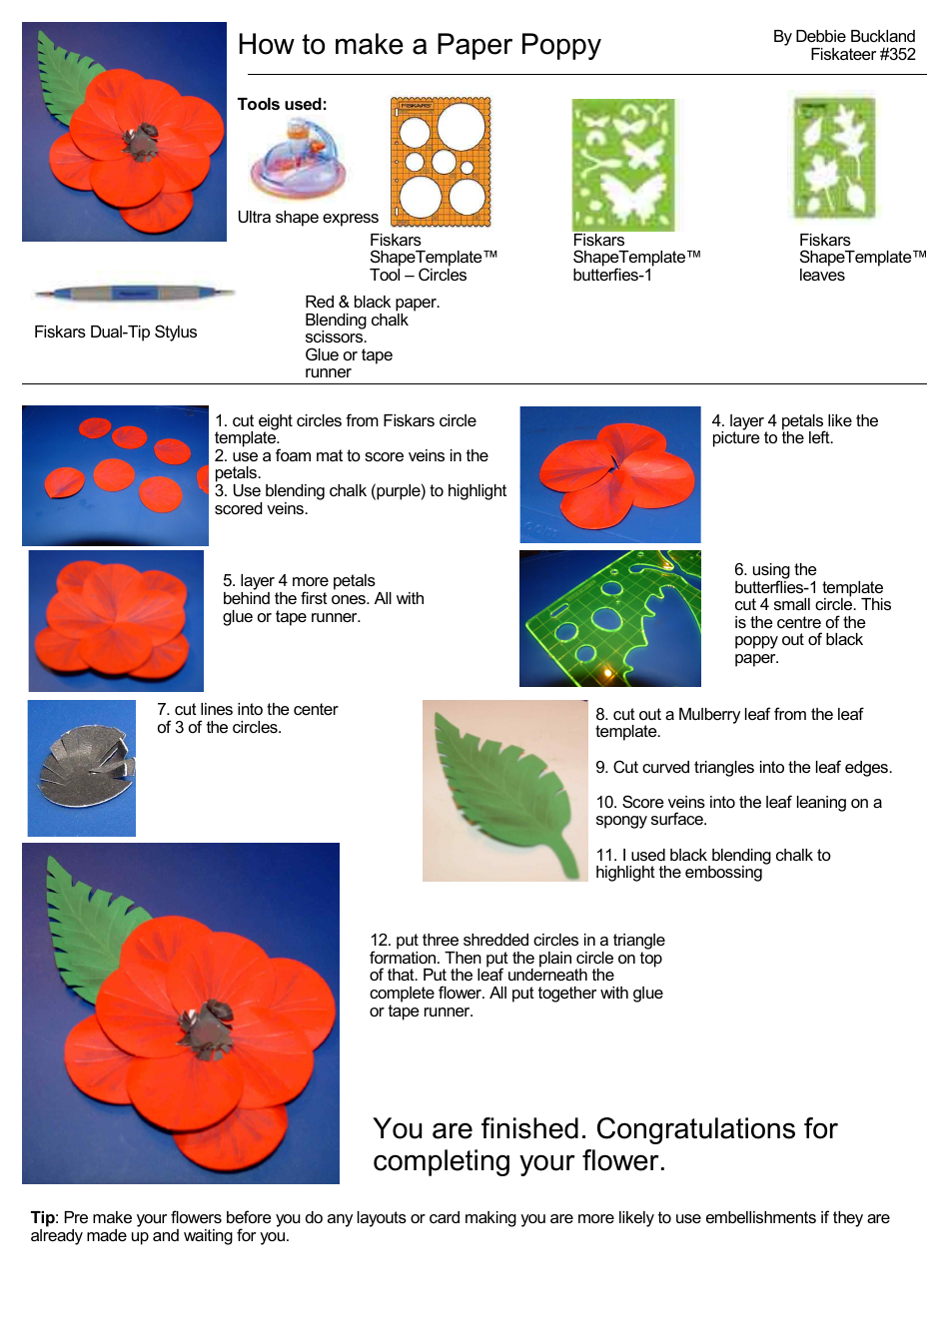 Paper Poppy Craft Guide - Learn How to Make Beautiful Paper Poppies